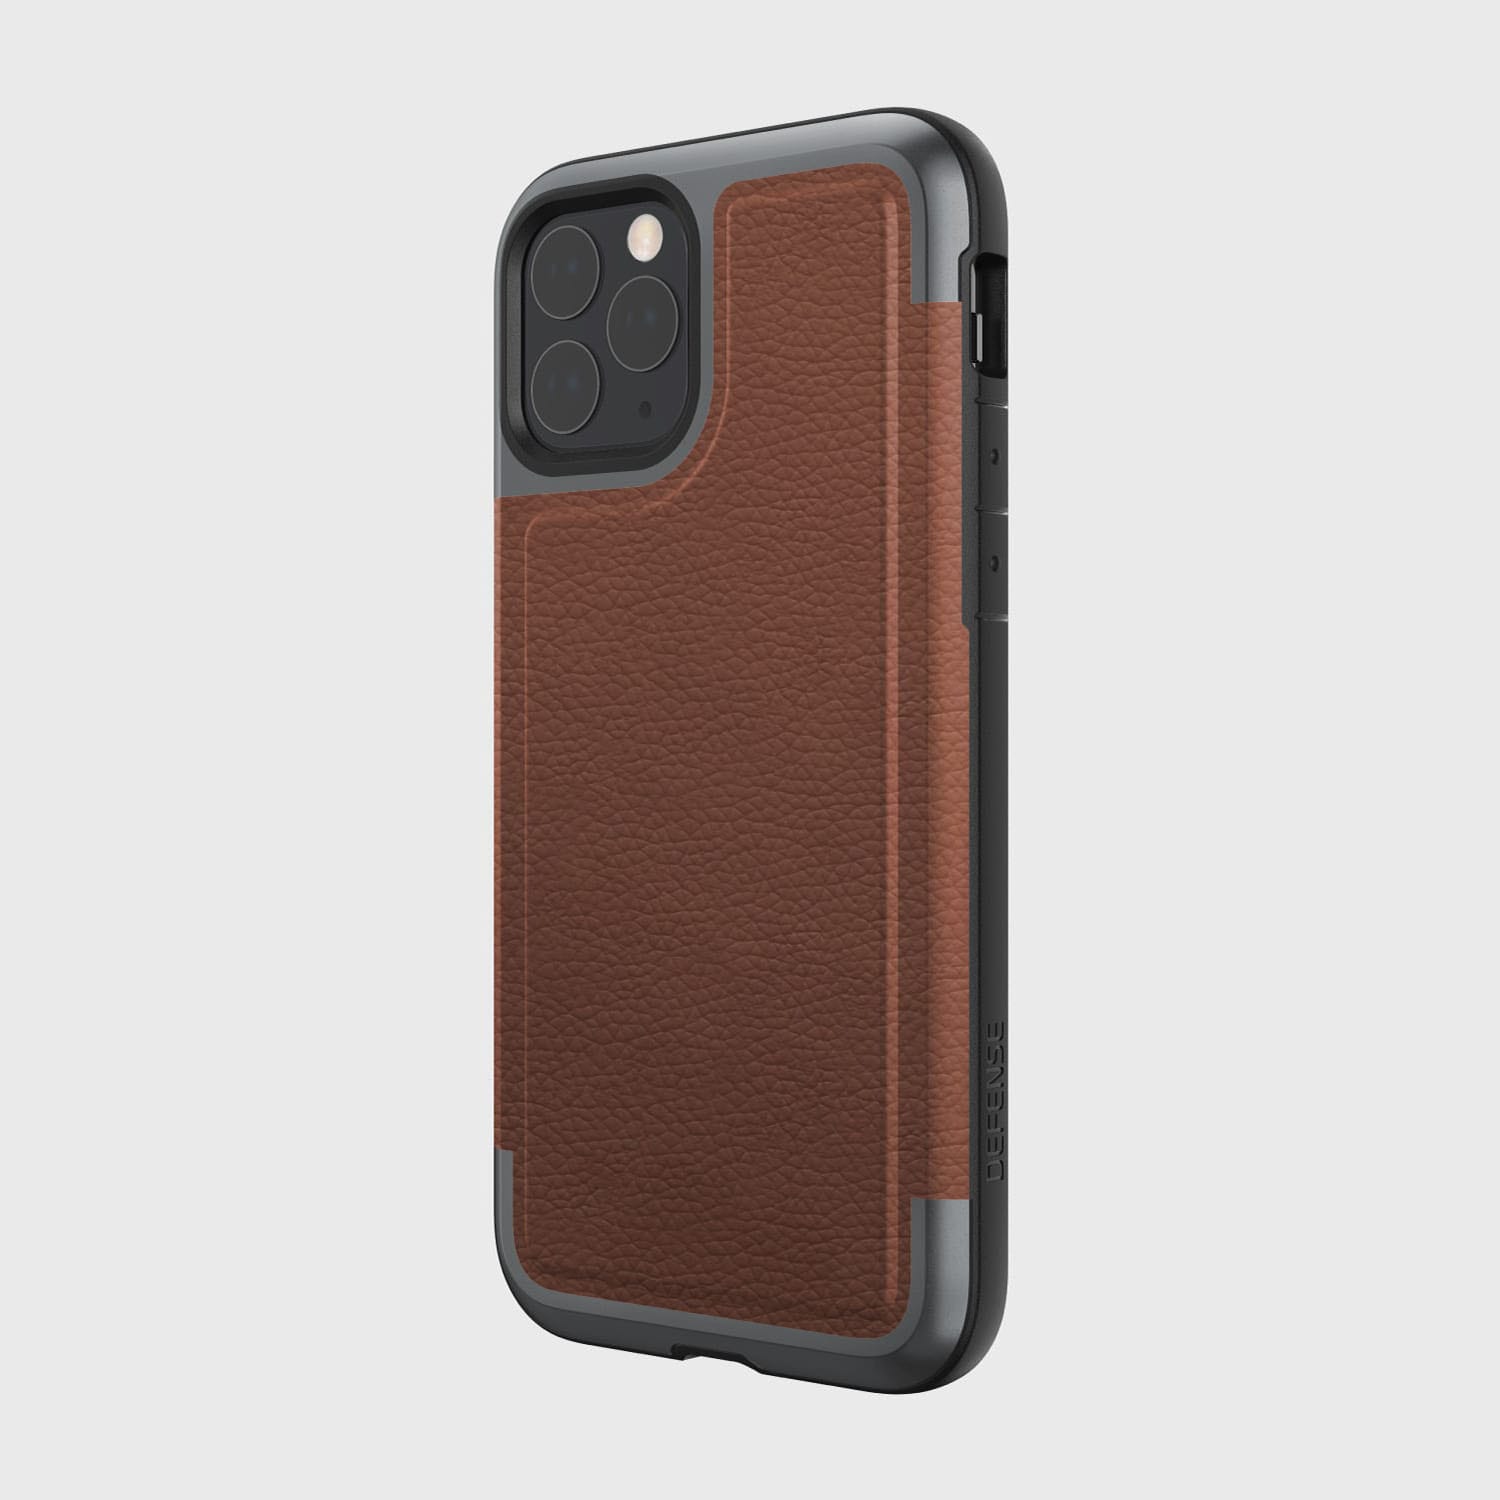 A drop protection Raptic brown leather iPhone 11 Case - PRIME.